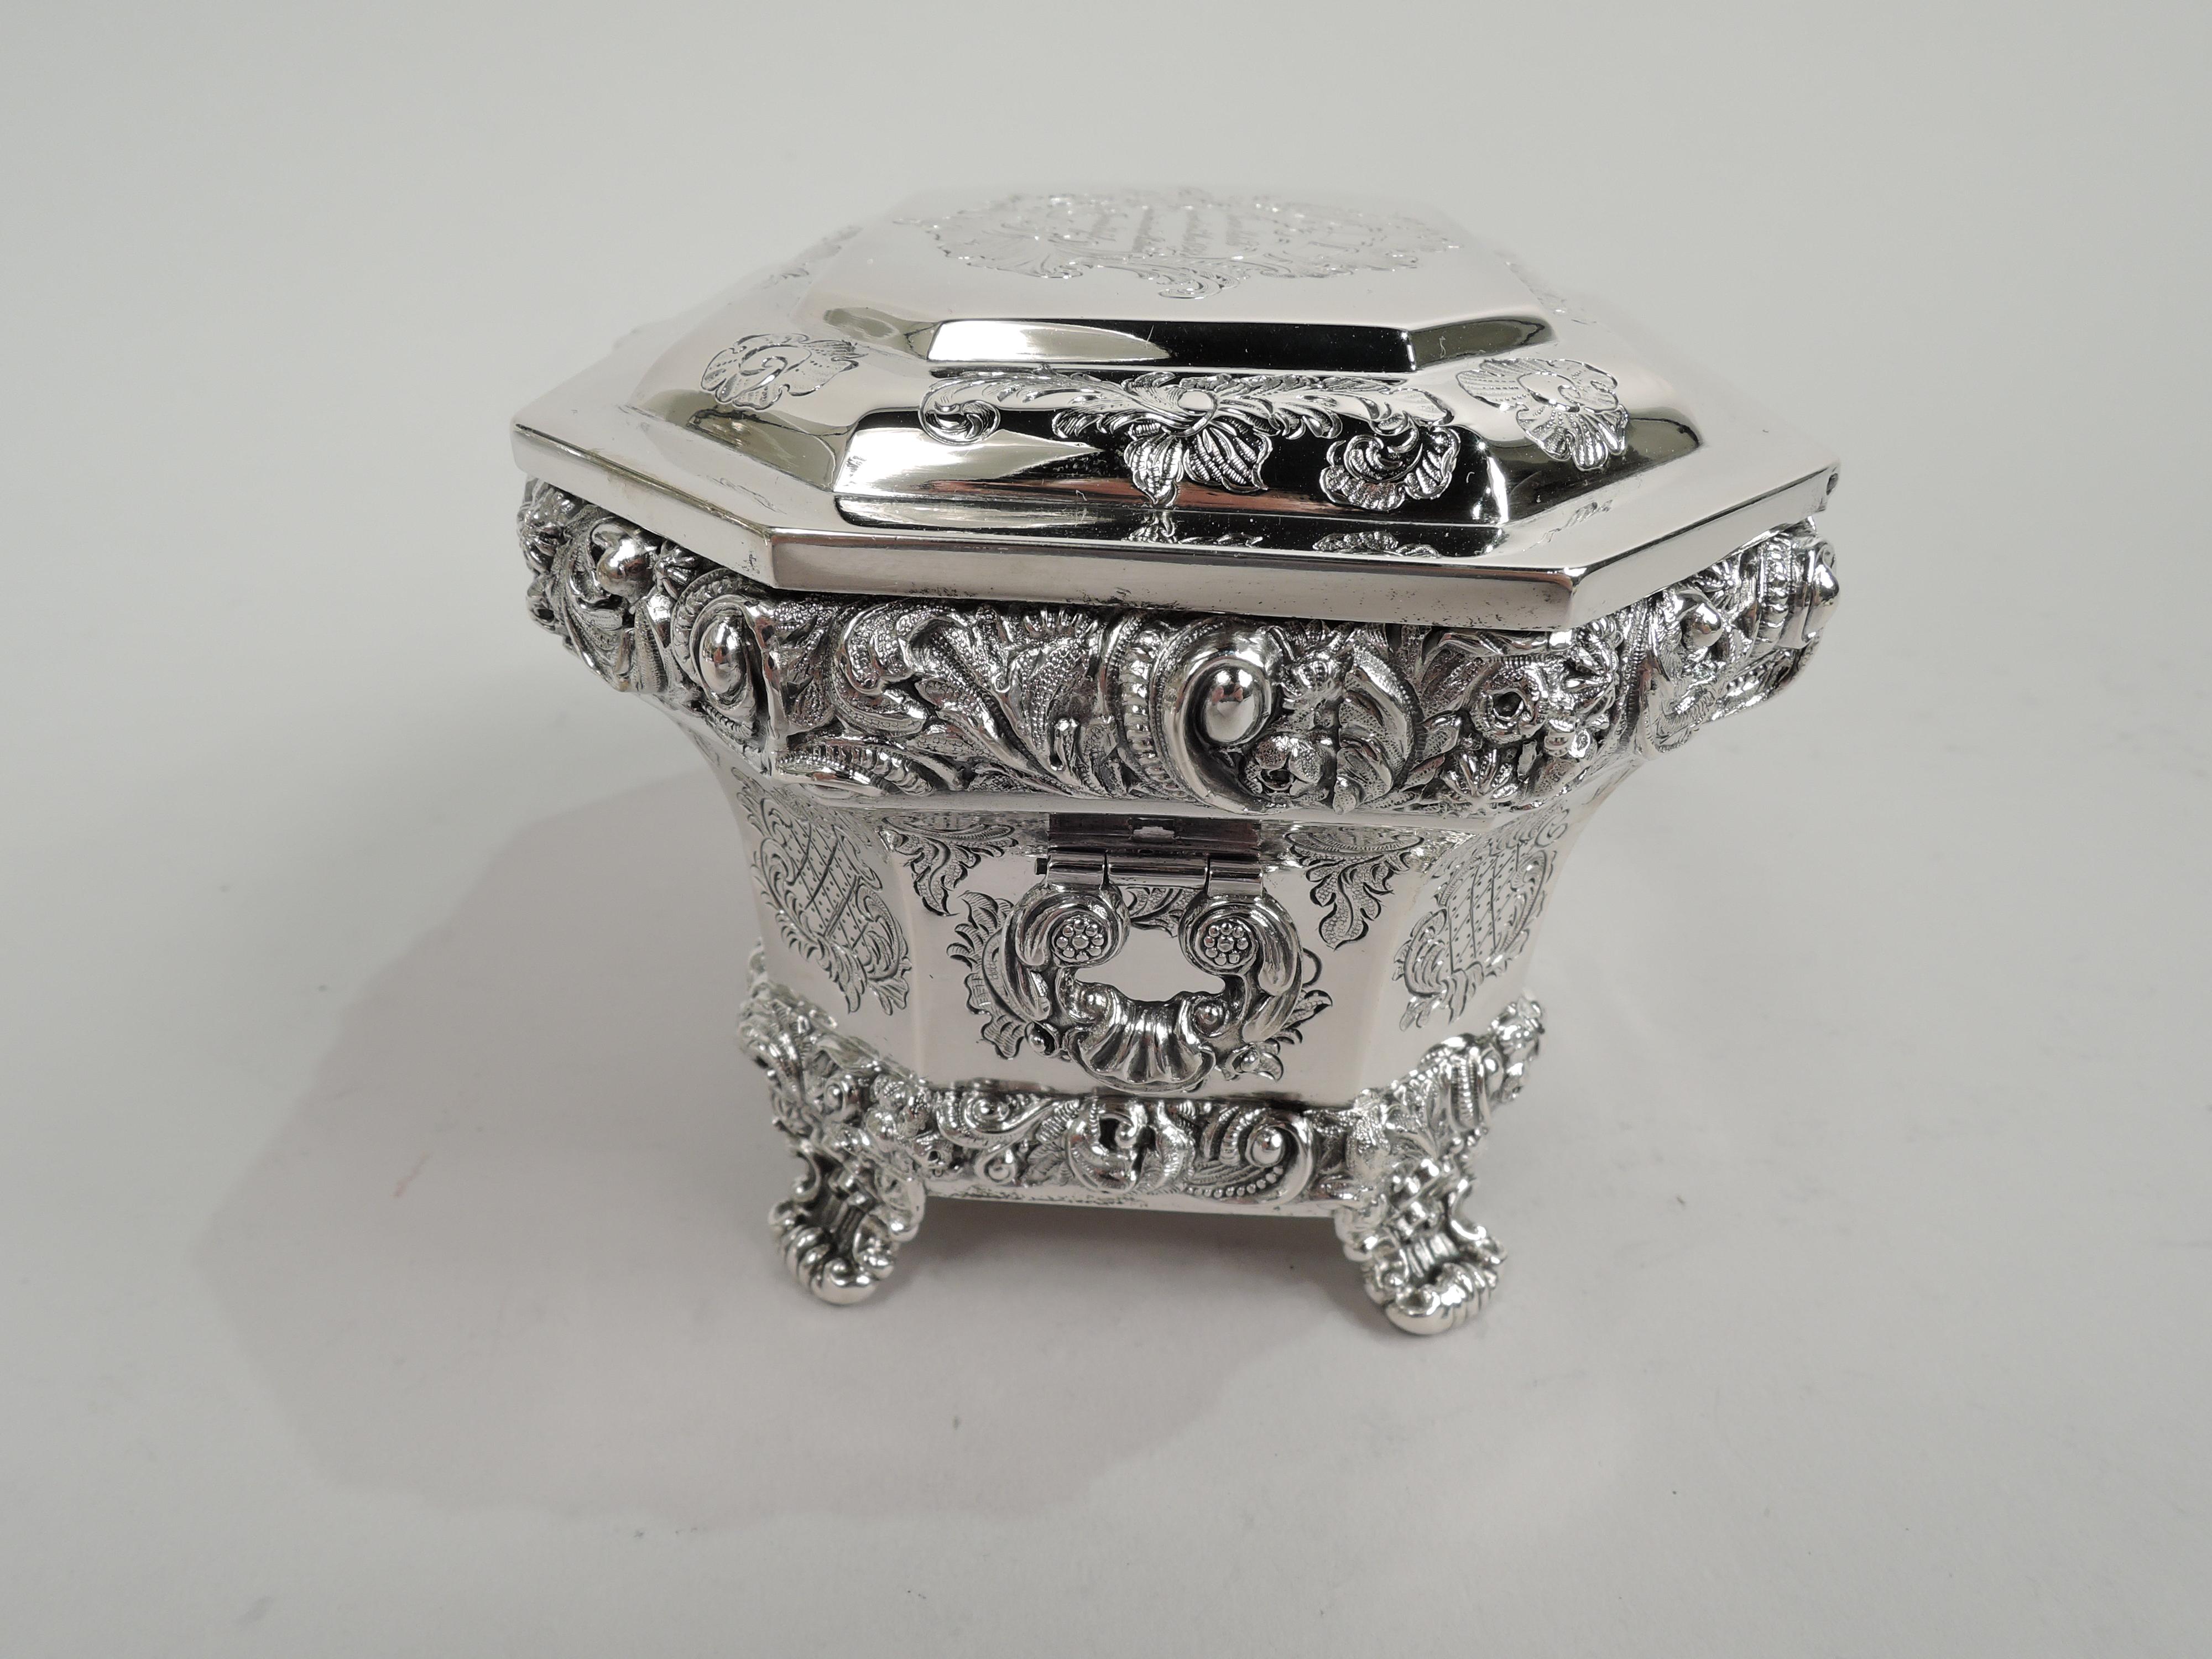 Austrian Biedermeier Classical 812 silver casket. Rectilinear with tapering sides and chamfered corners. Cover hinged, tabbed, and stepped. Applied scroll and flower rims. Engraved leaves and flowers. Loose-mounted c-scroll end handles. Corner shell